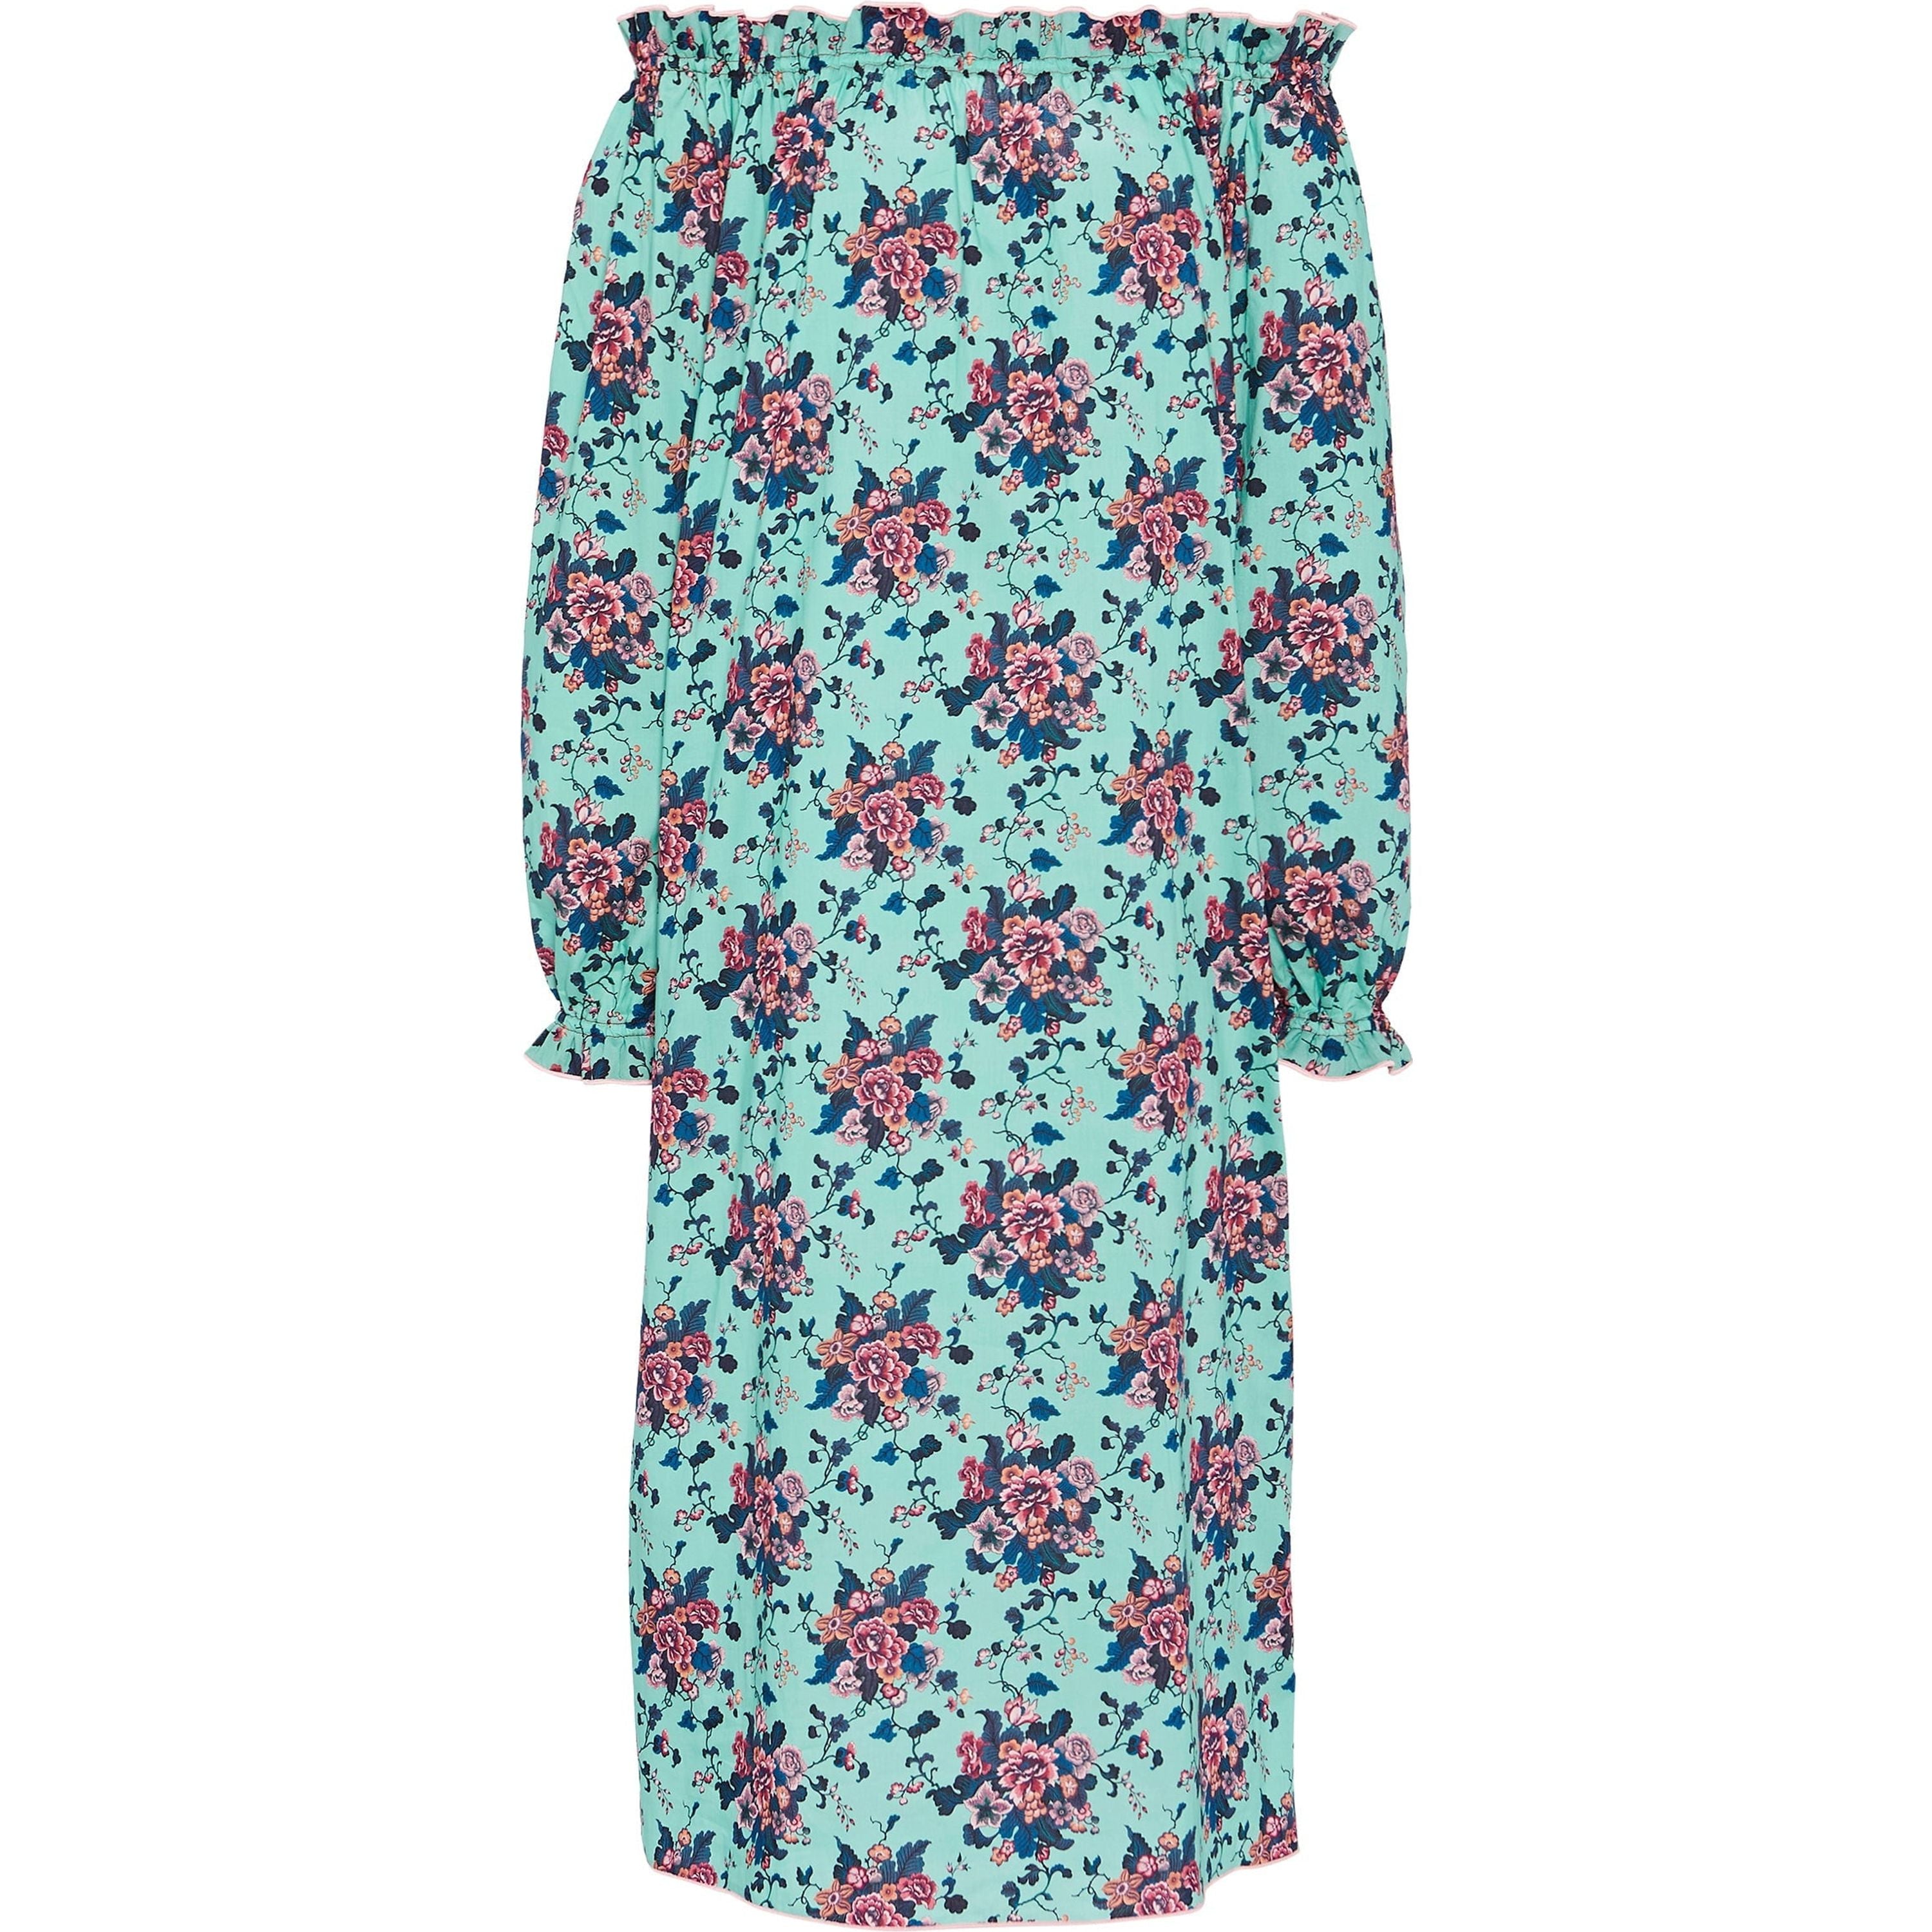 Women's Grace Dress in Turquoise Chinoiserie - Casey Marks